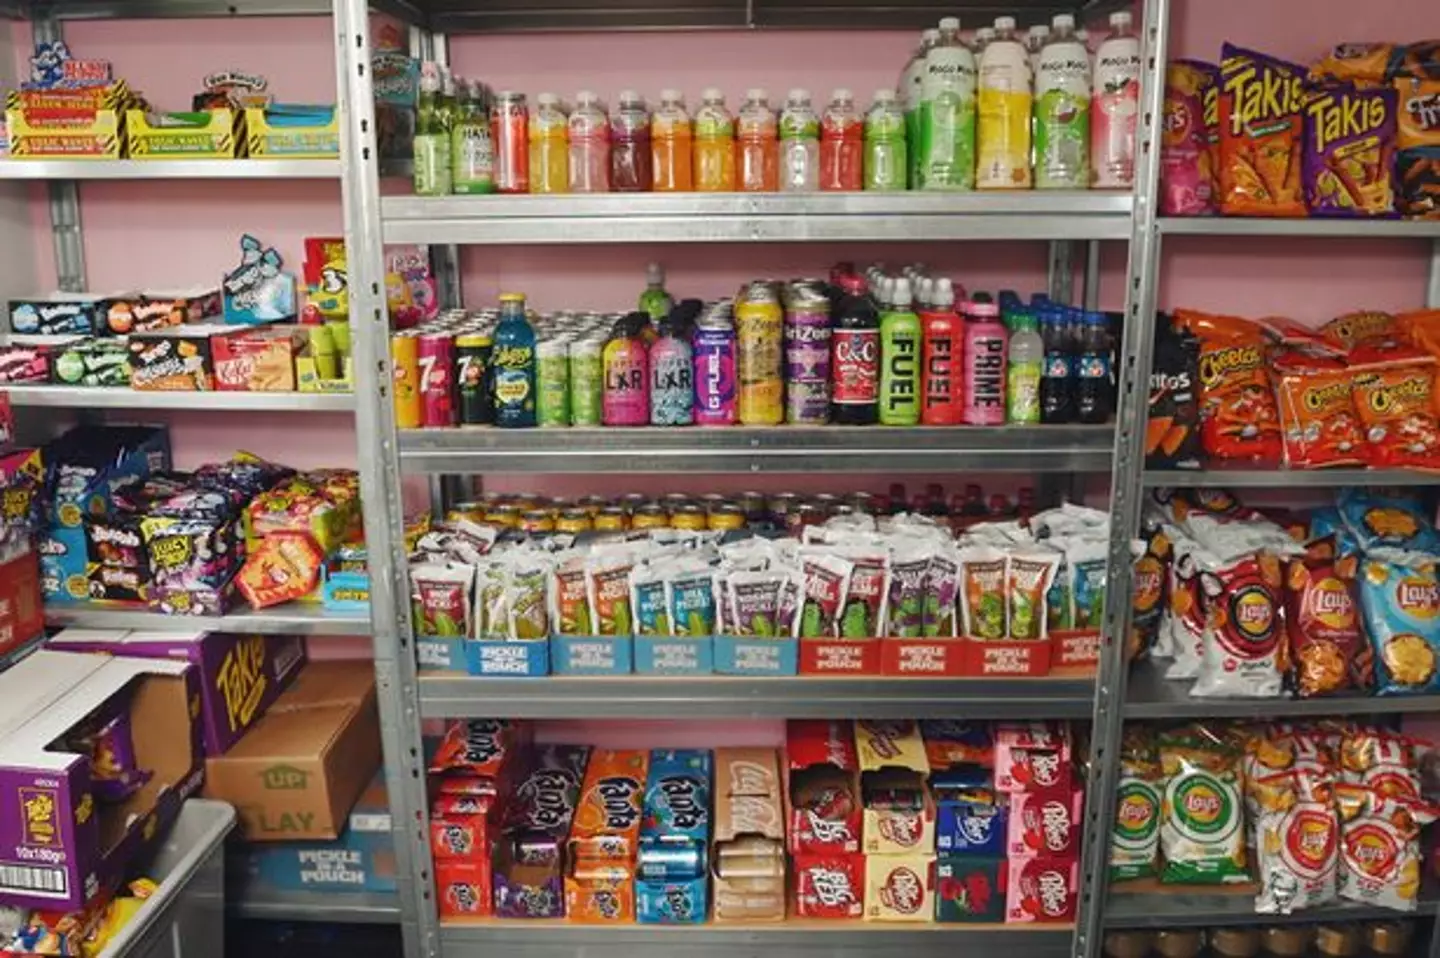 The Sweet Shack stocks more than 700 products.